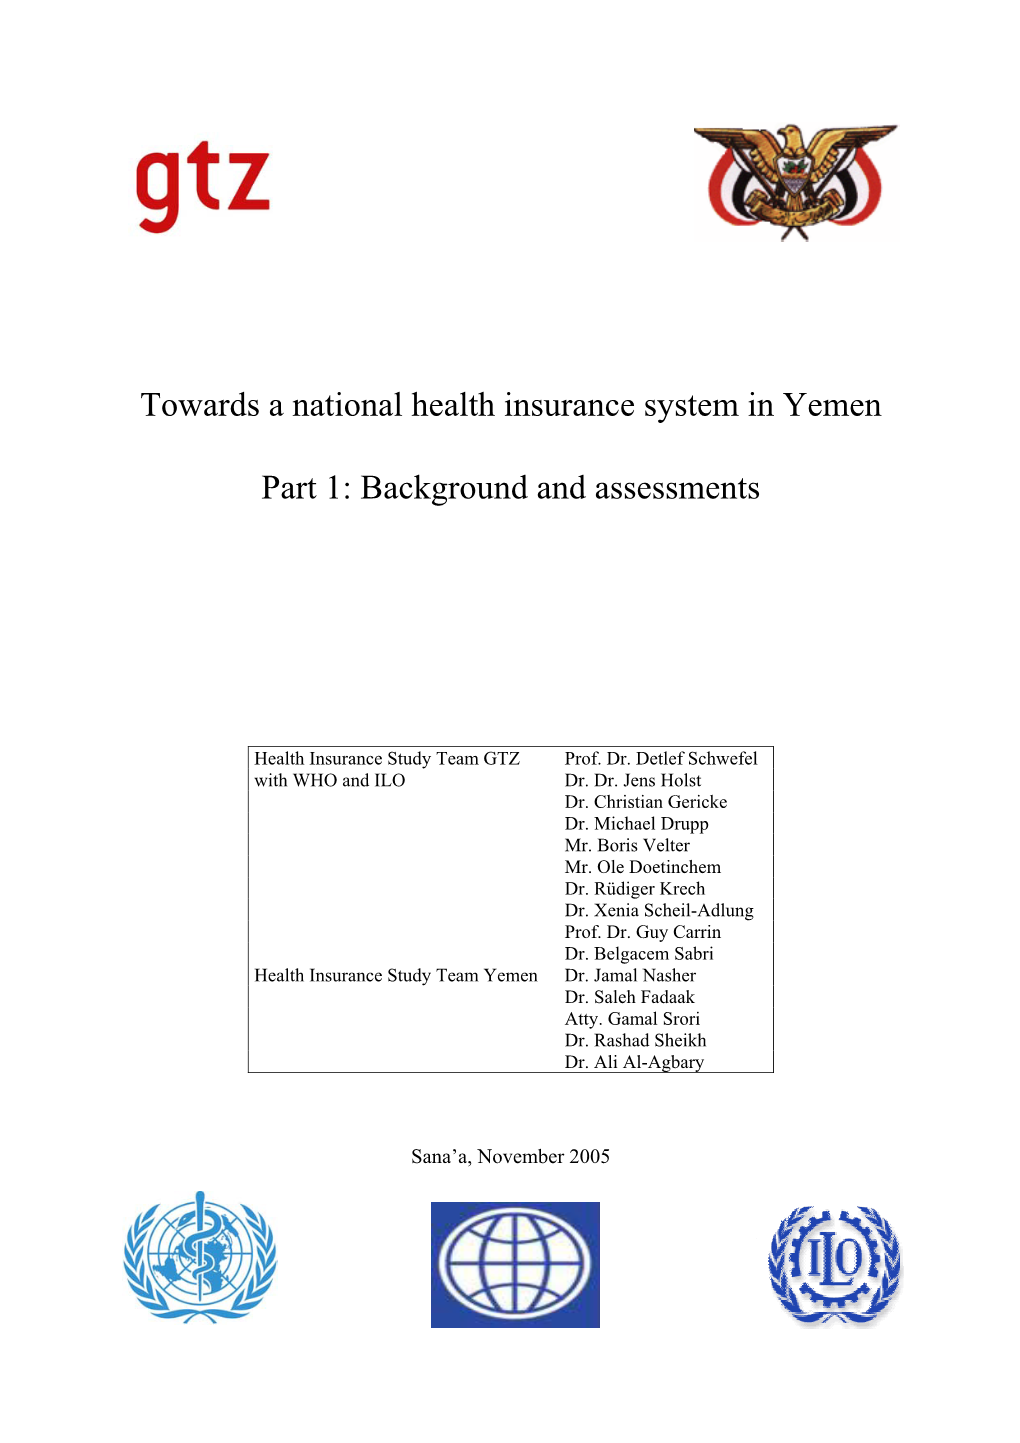 Towards a National Health Insurance System in Yemen Part 1